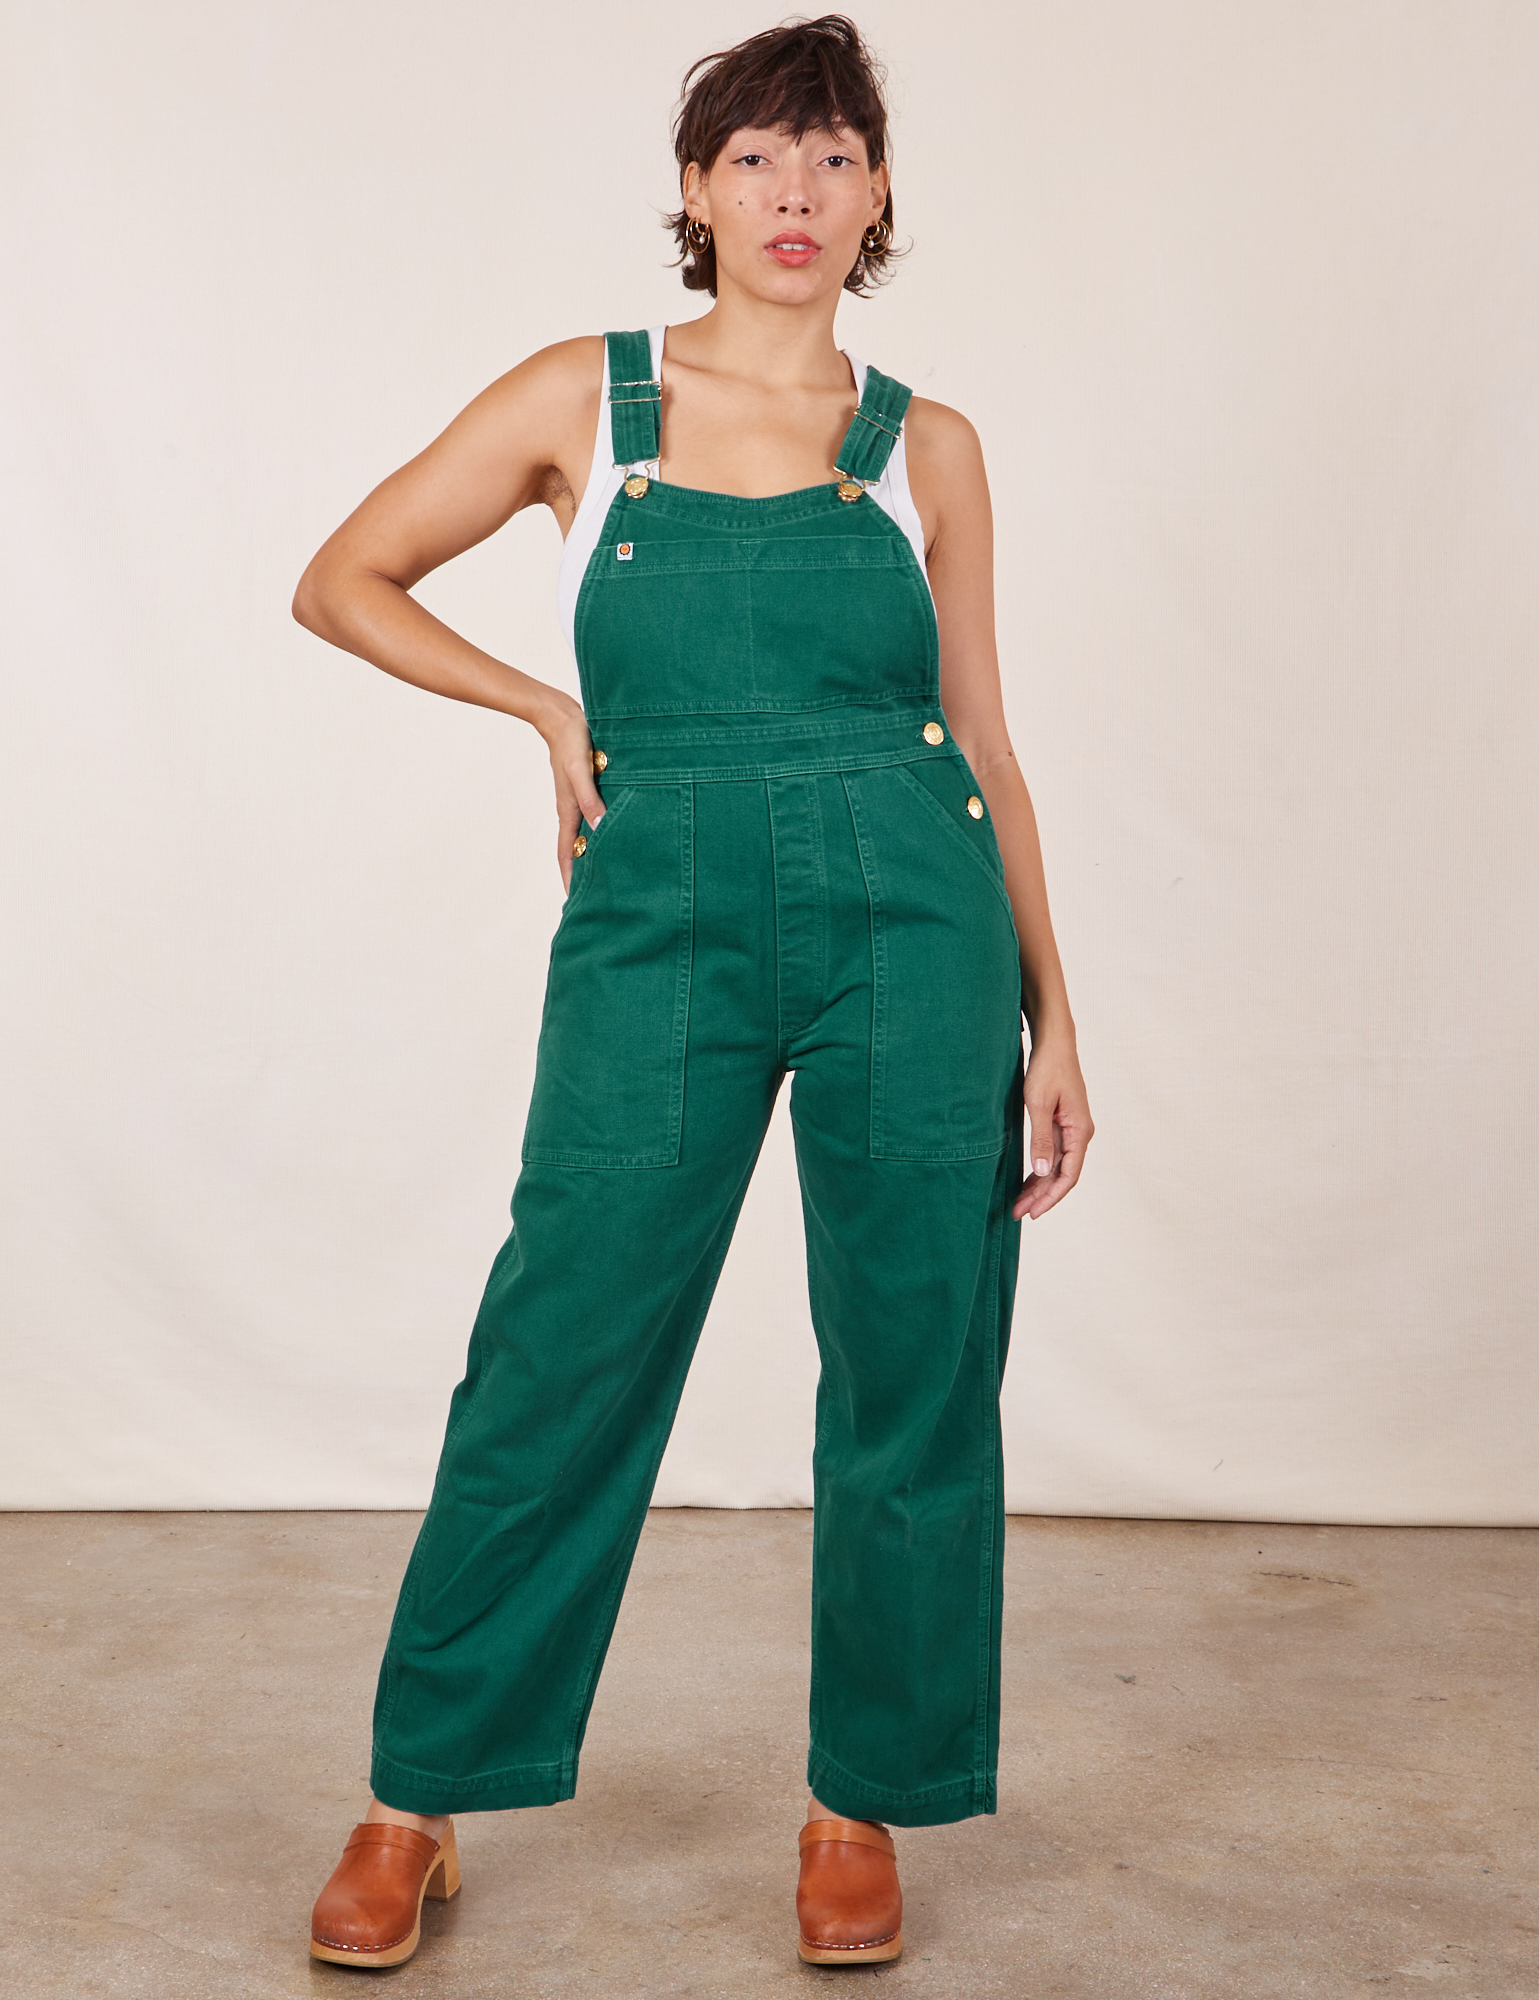 Tiara is 5&#39;4&quot; and wearing XS Original Overalls in Mono Hunter Green